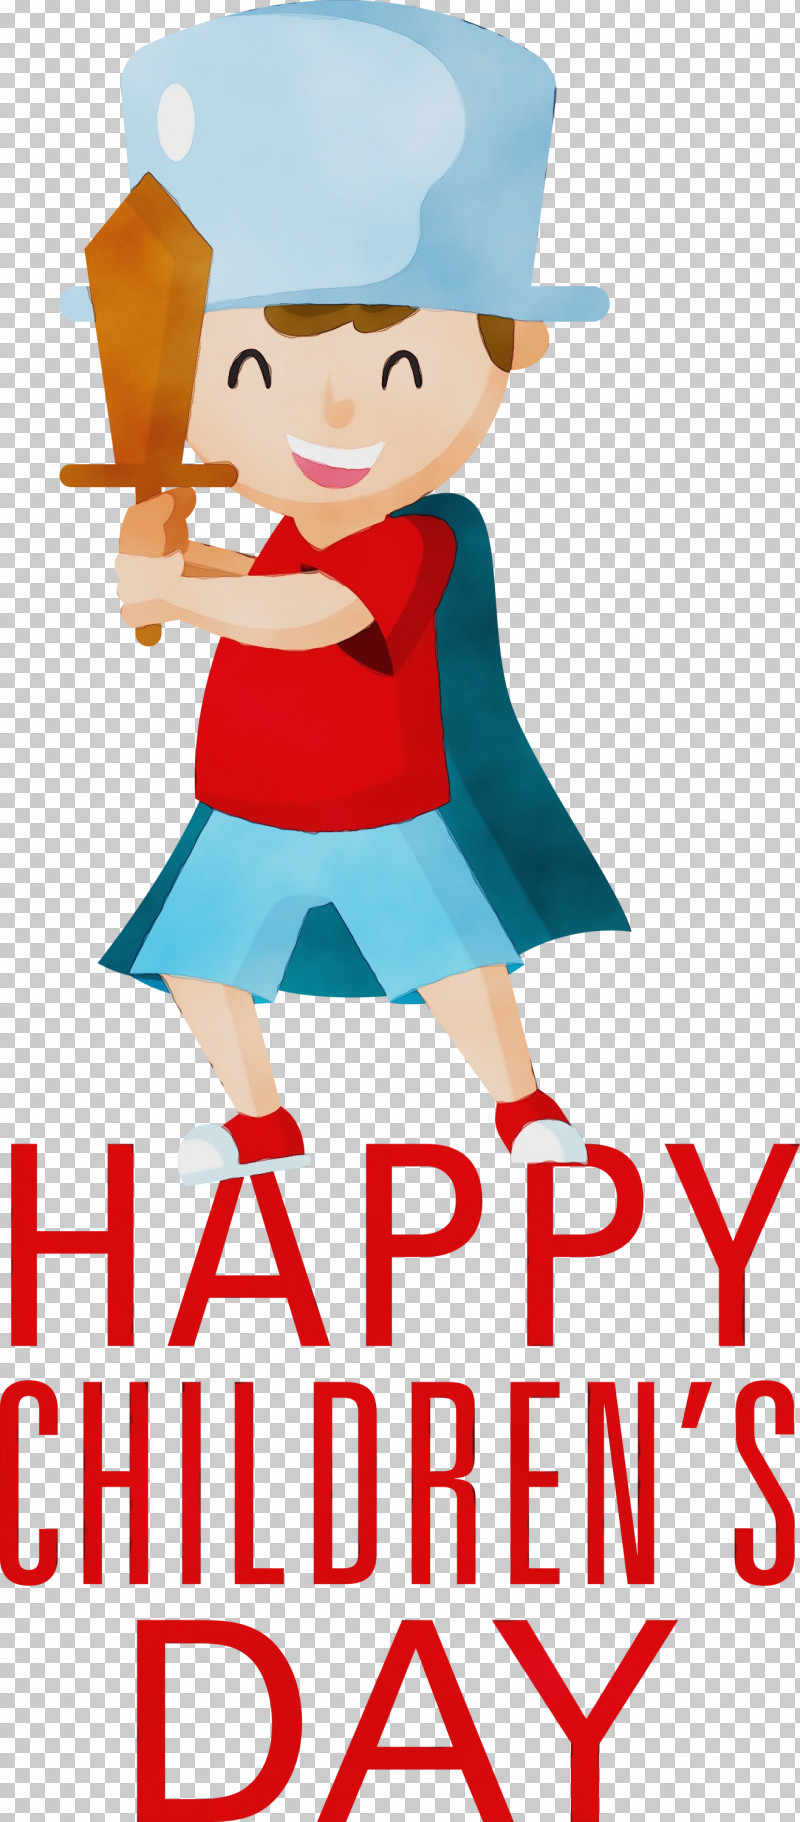 Human Cartoon Behavior Headgear Happiness PNG, Clipart, Behavior, Cartoon, Character, Childrens Day, Happiness Free PNG Download